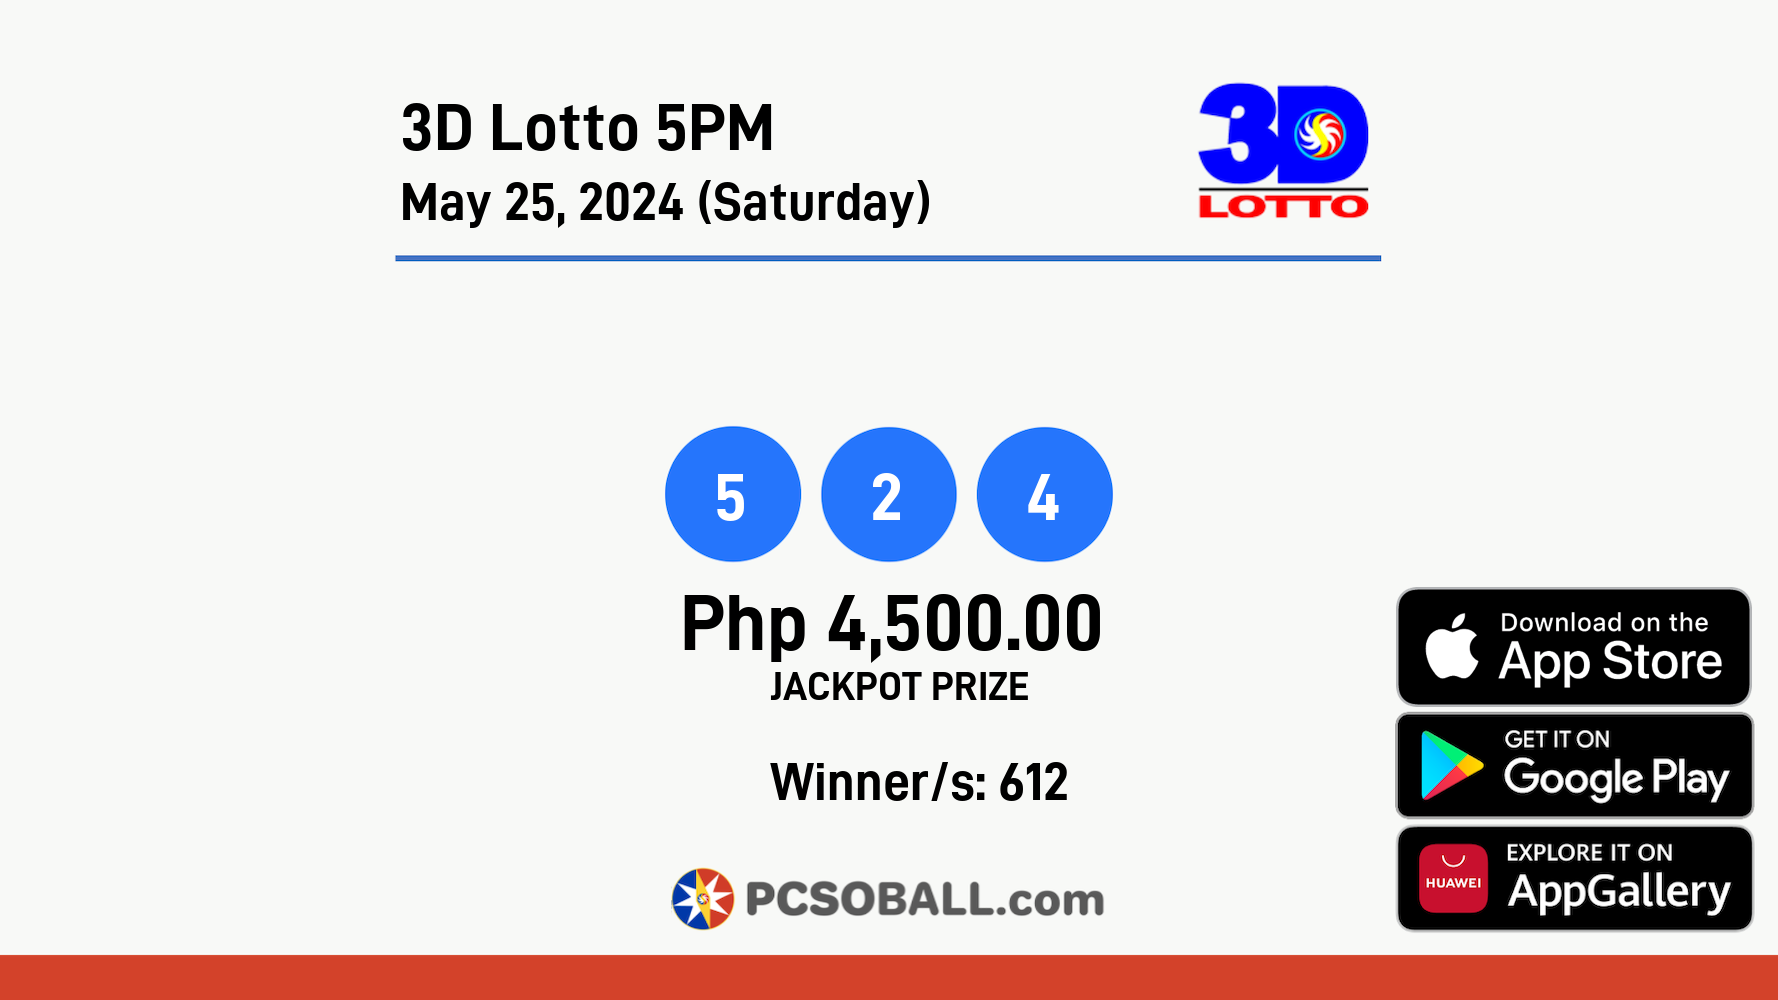 3D Lotto 5PM May 25, 2024 (Saturday) Result